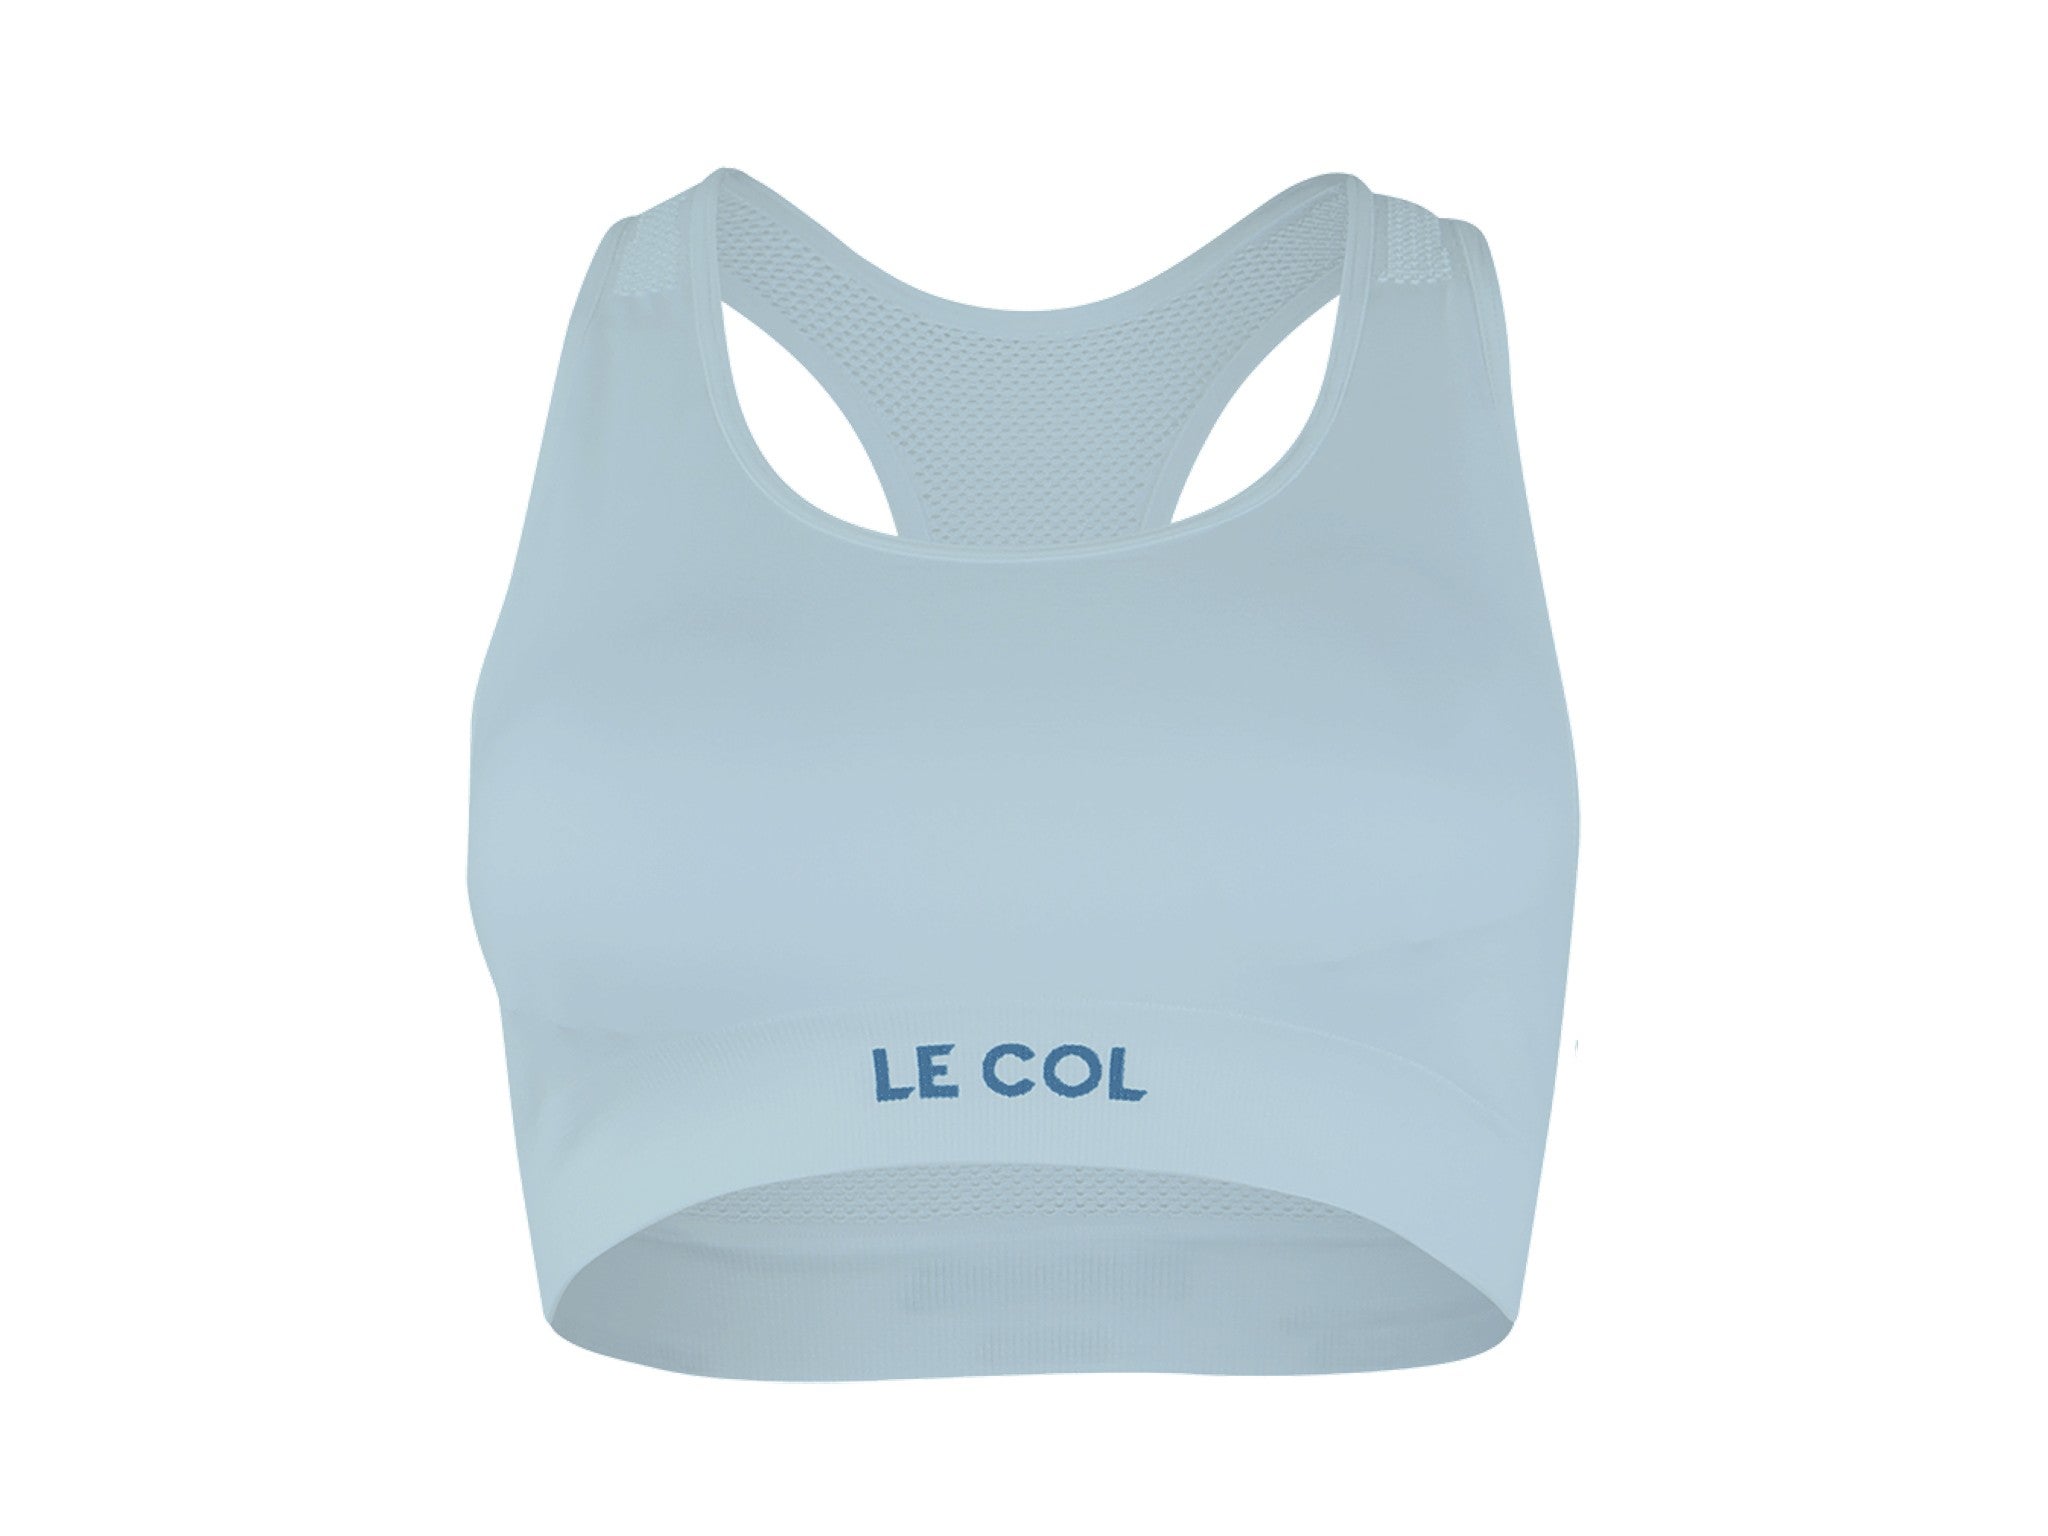 13 Best Sports Bra Tank Tops for Performance & Style